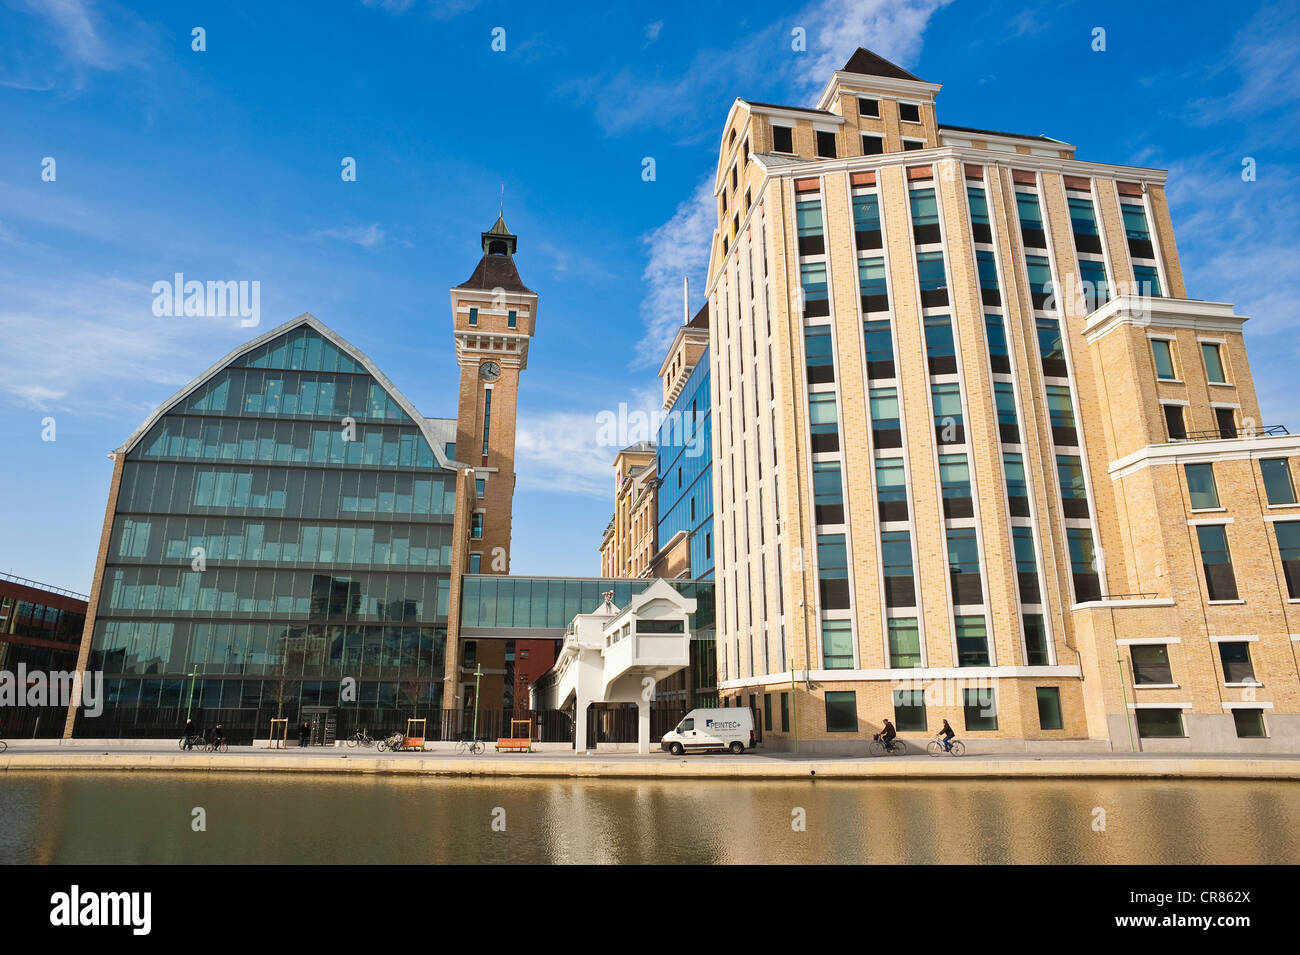 France, Seine Saint Denis, Pantin, Pantin great windmills, former  industrial flour-milling created in 1884 and converted into Stock Photo -  Alamy